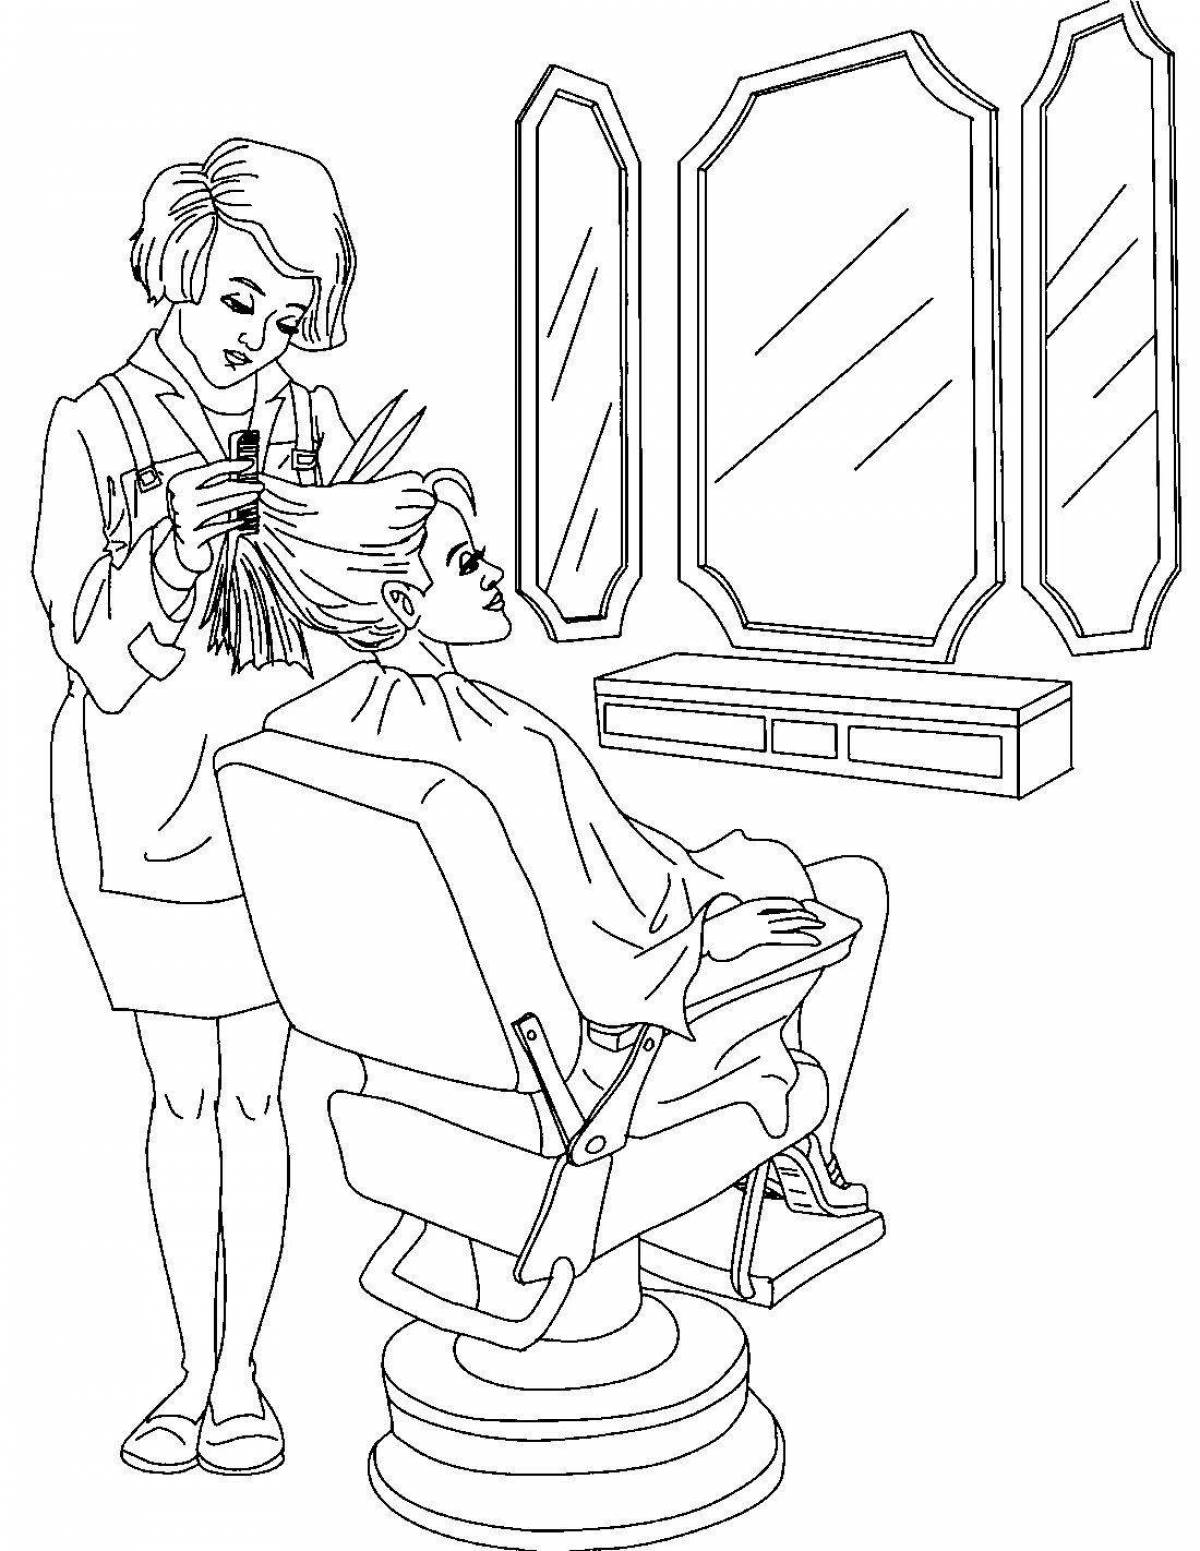 A fun hairdresser coloring book for kids